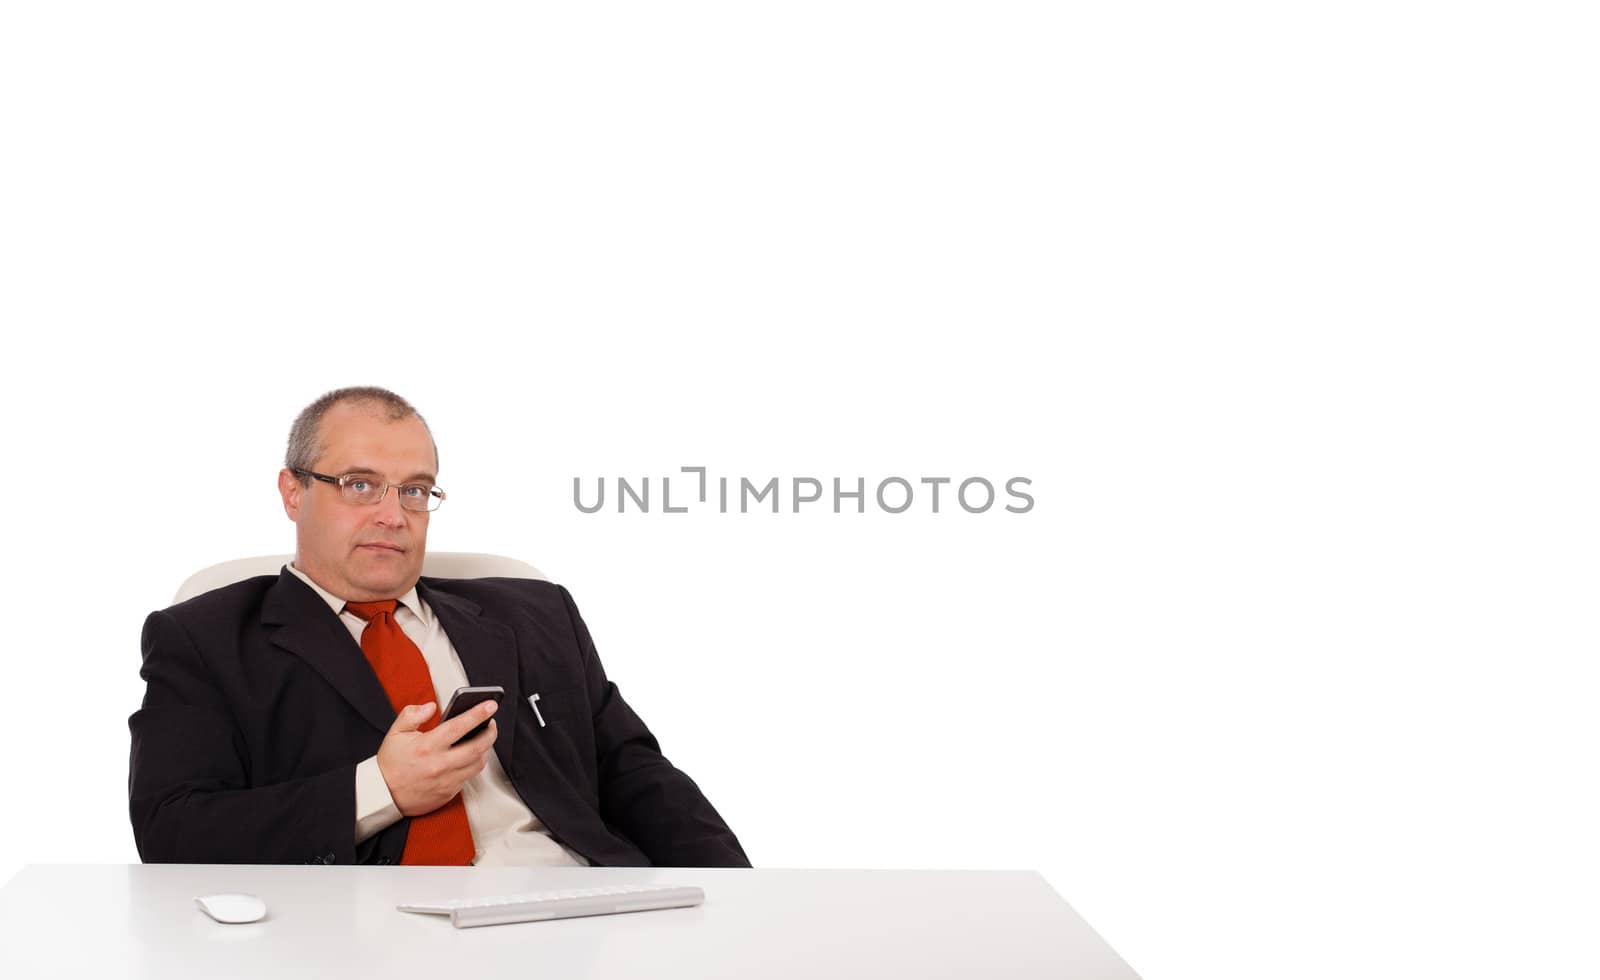 businessman sitting at desk and holding a mobilephone with copys pace, isolated on white